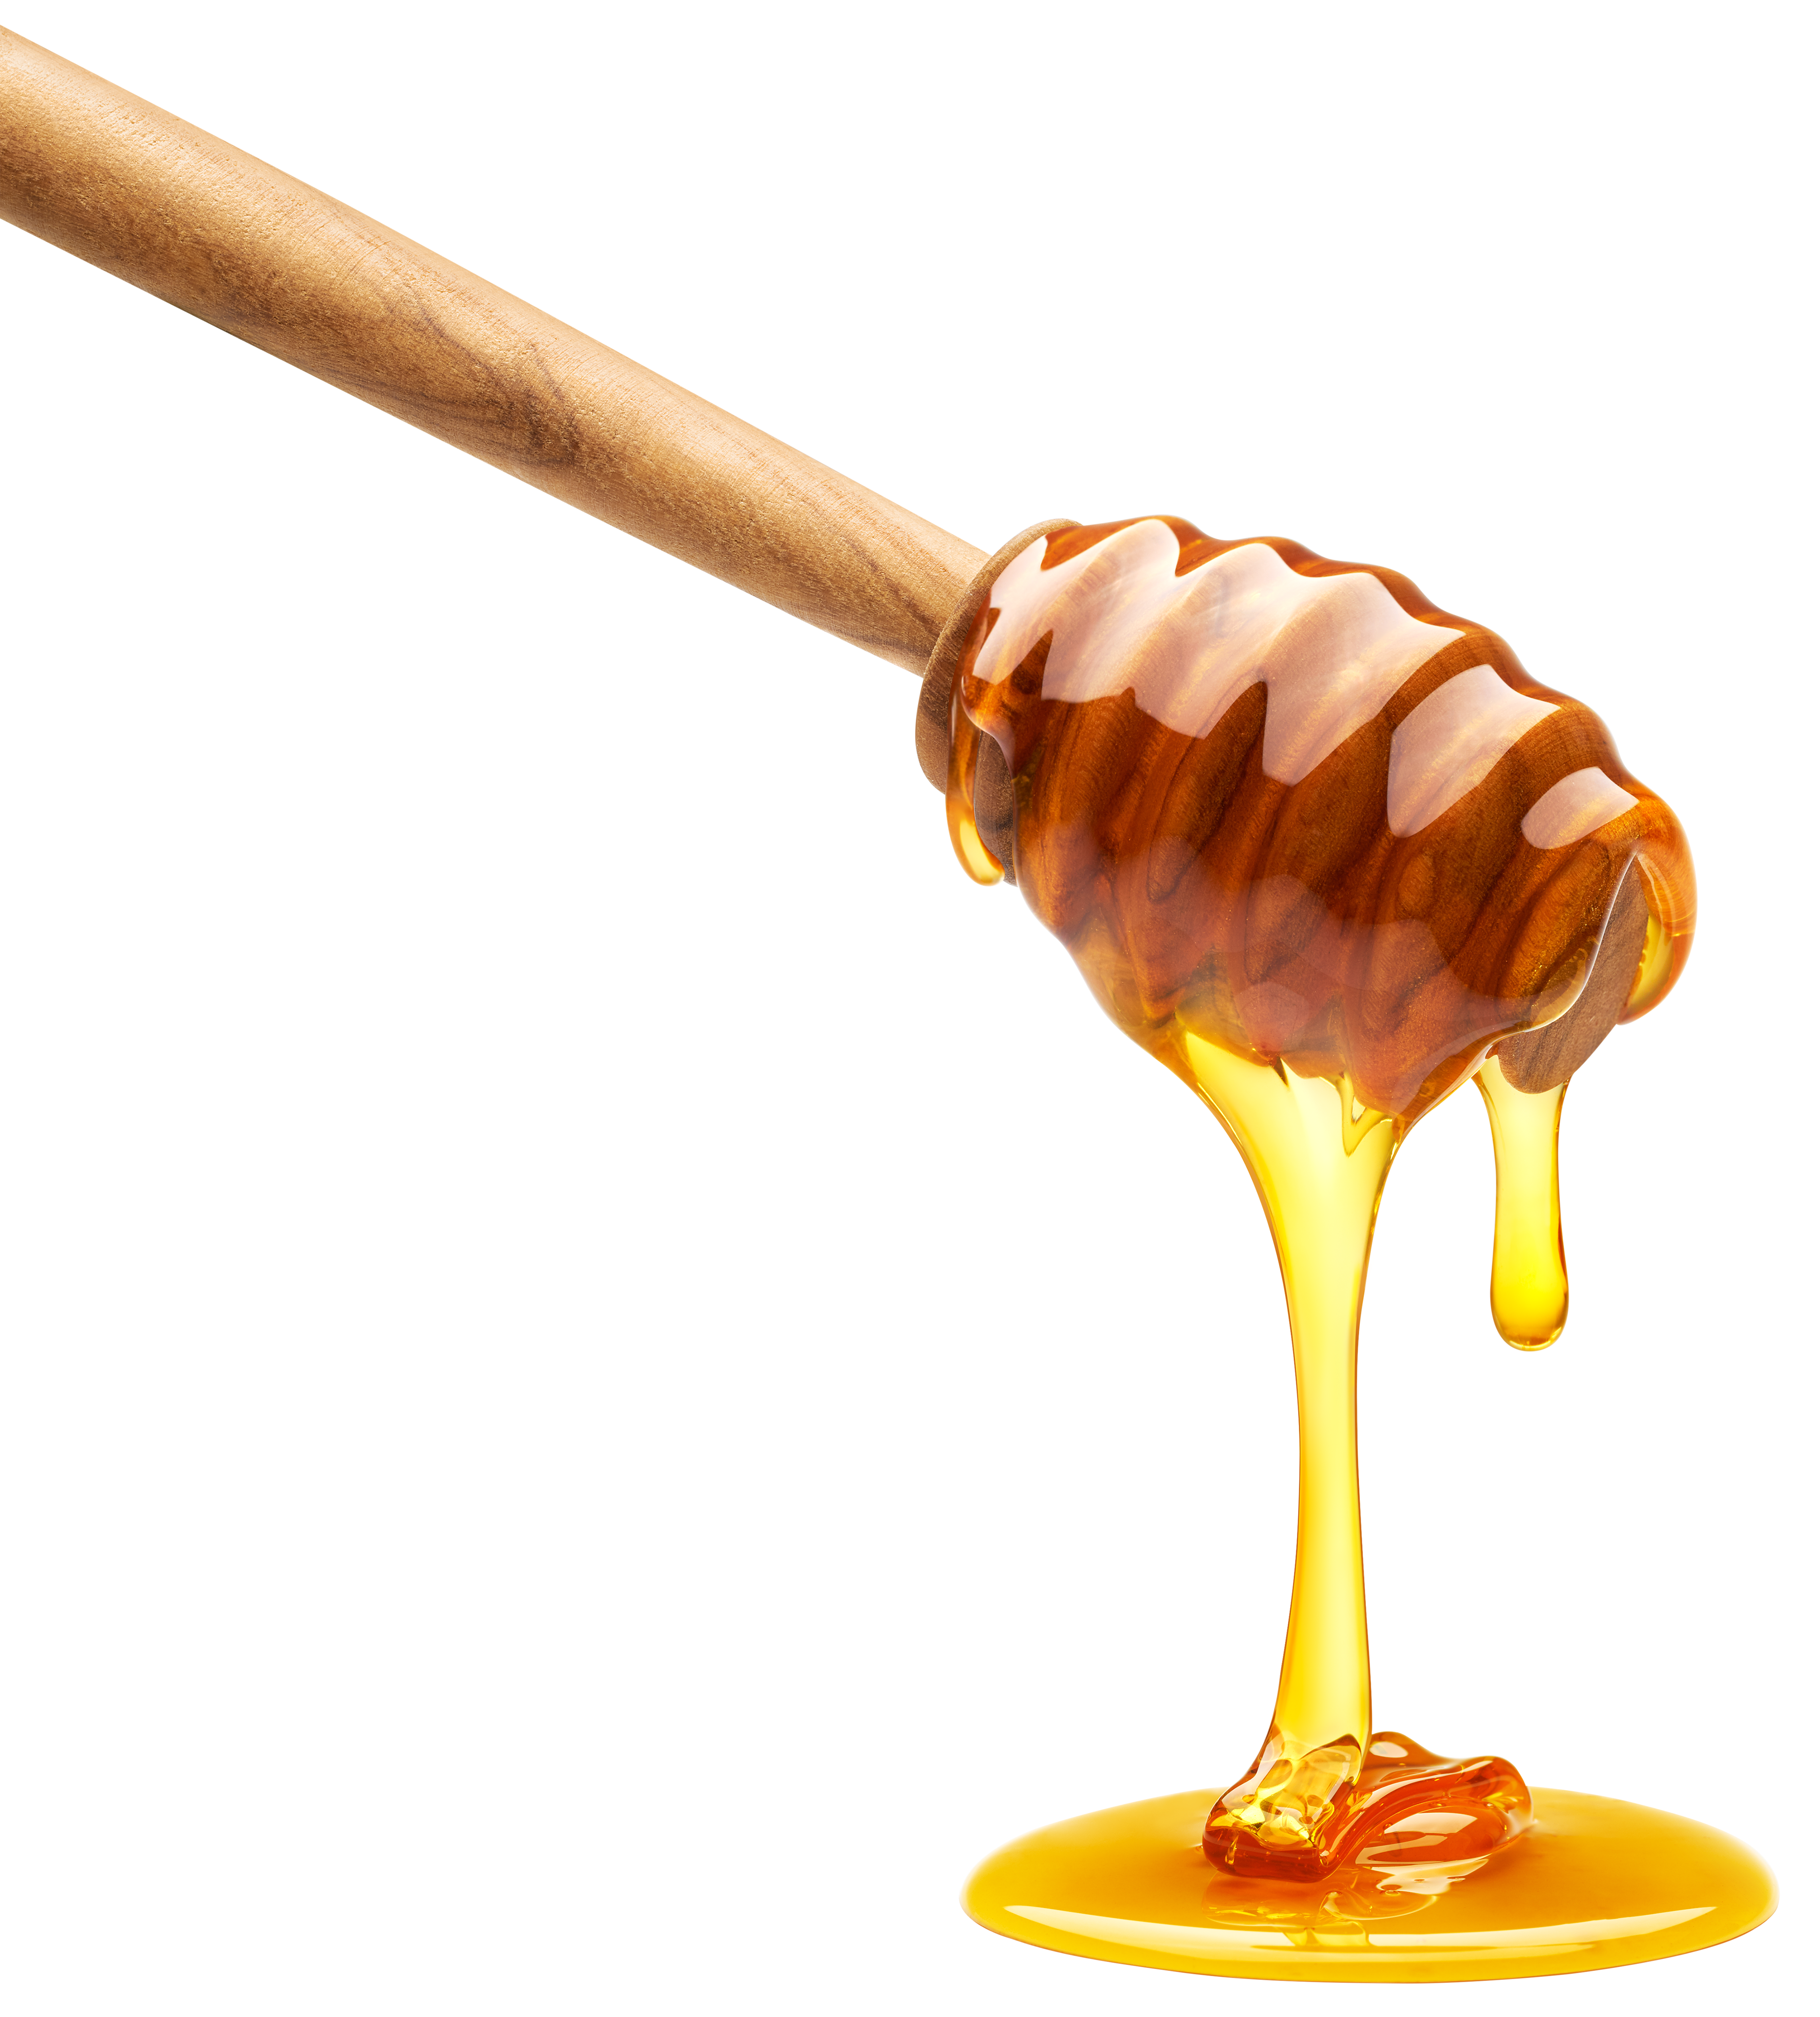 Honey dripping from dipper: © phive2015 - stock.adobe.com 